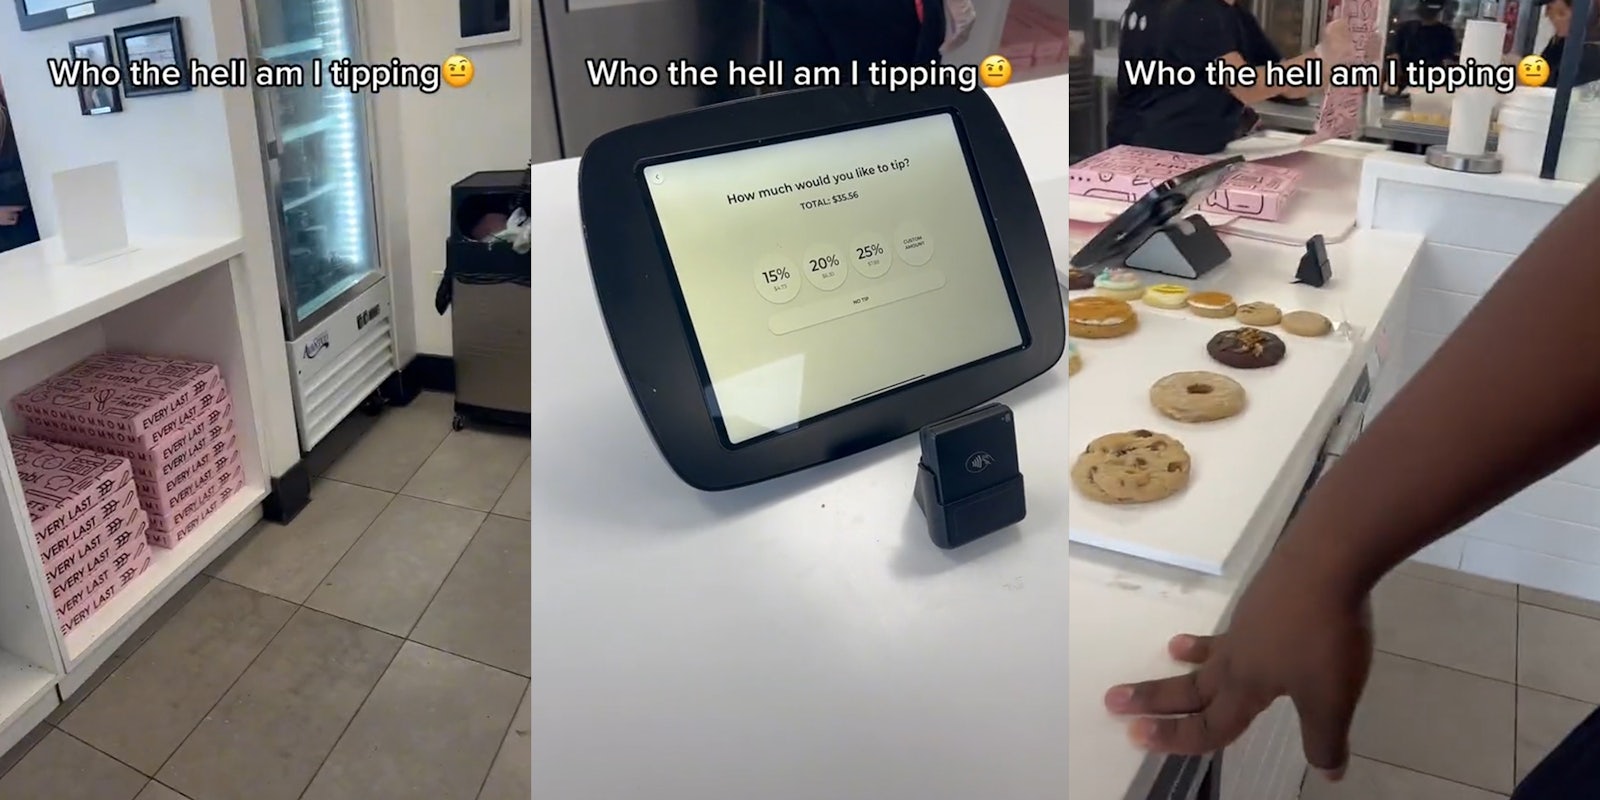 store interior (l) tablet with tip screen (c) hand on counter with cookies in background (r) all with caption 'Who the hell am I tipping'